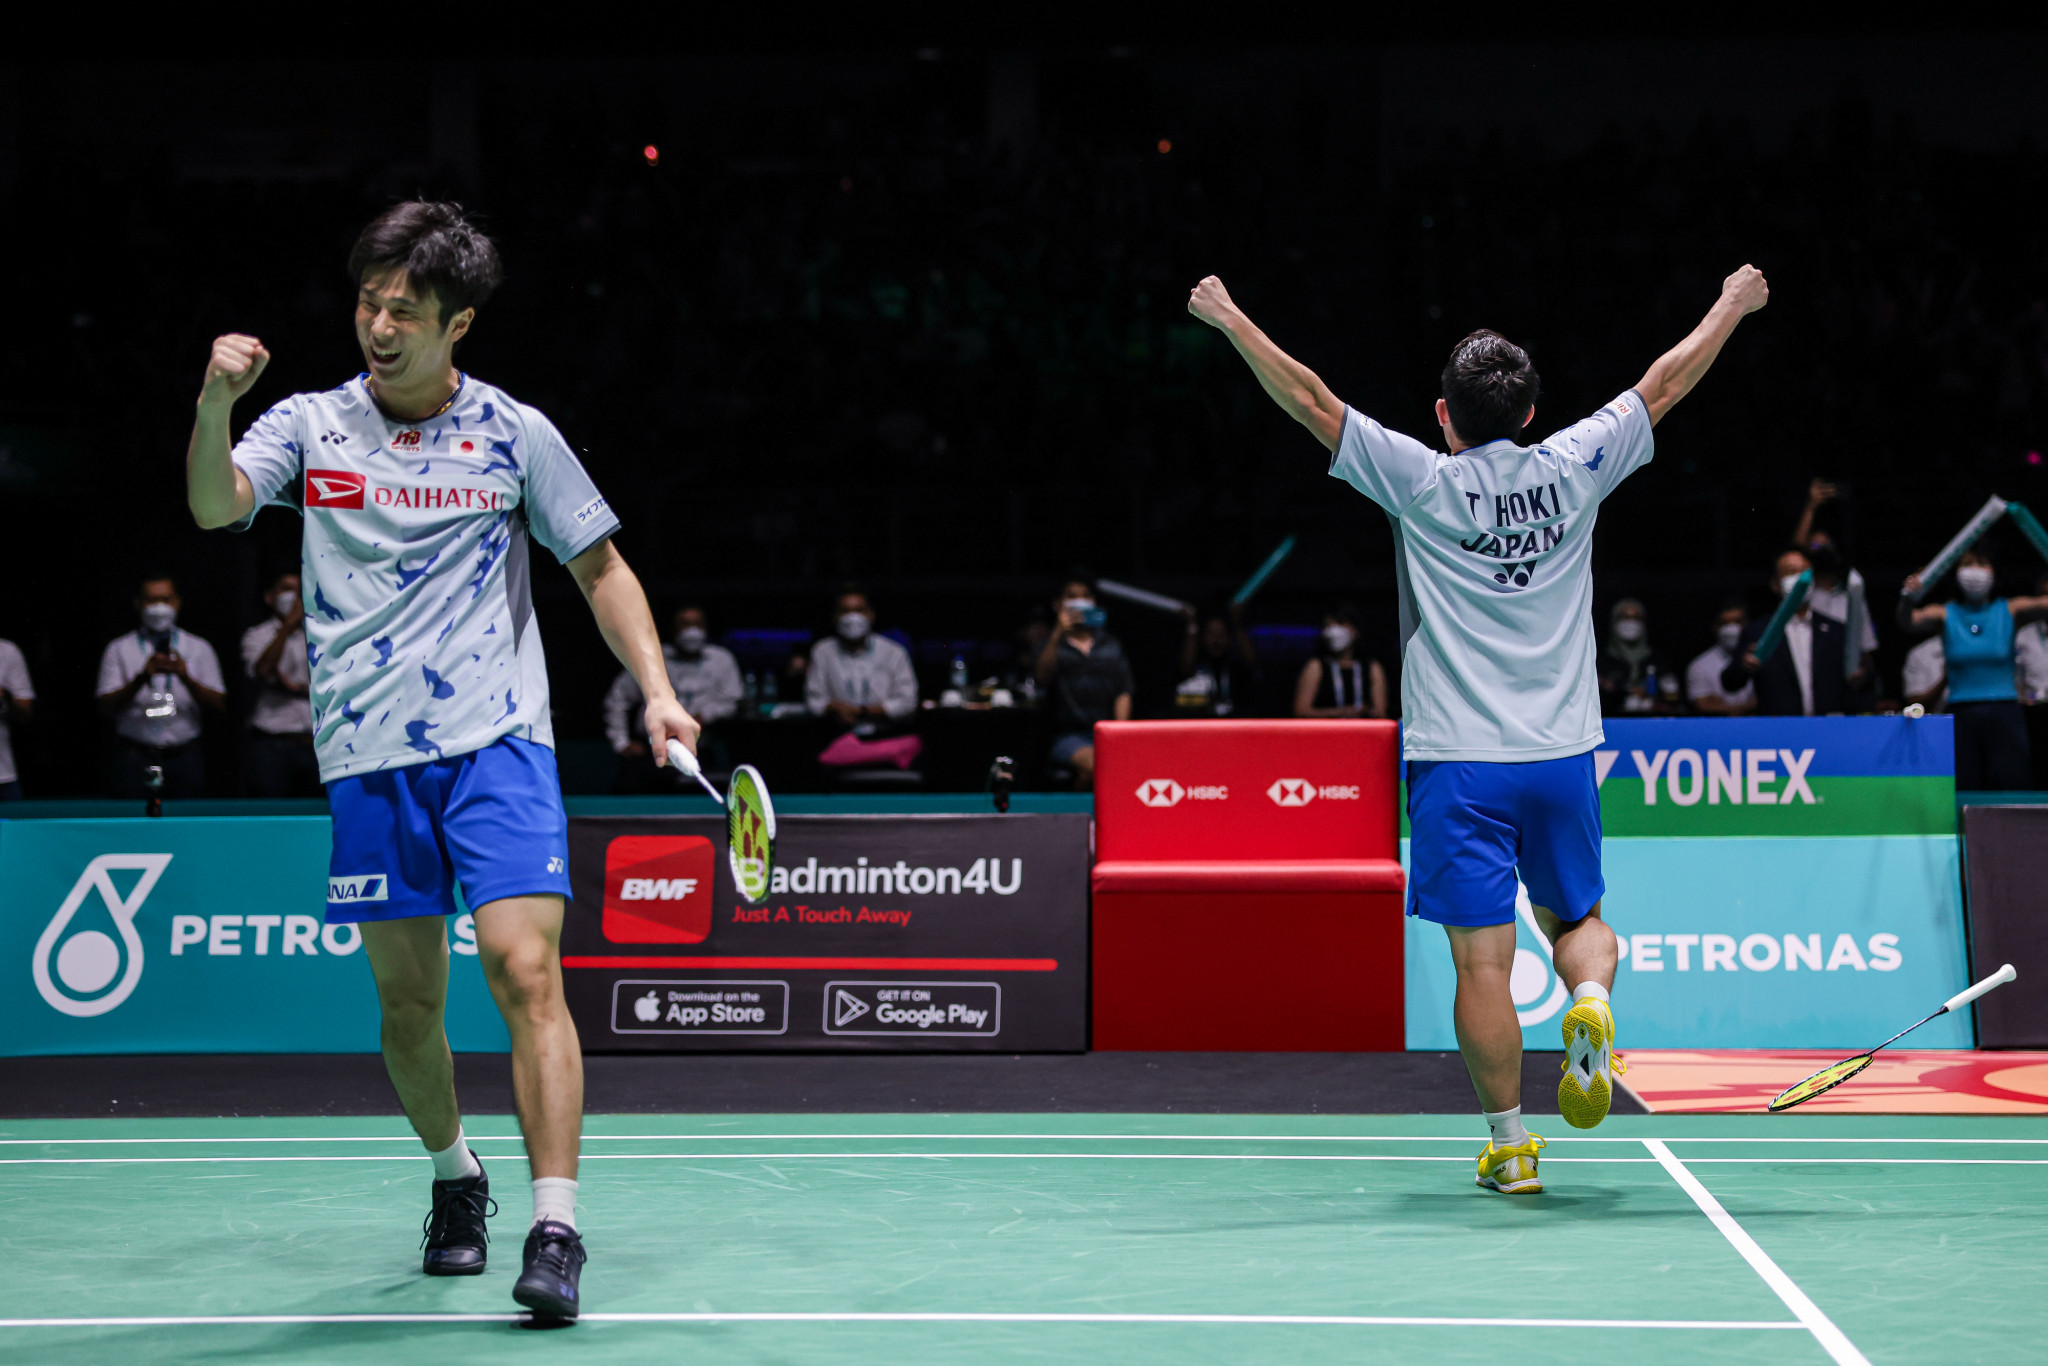 BWF betting partner to aid media operations at World Championships in Tokyo